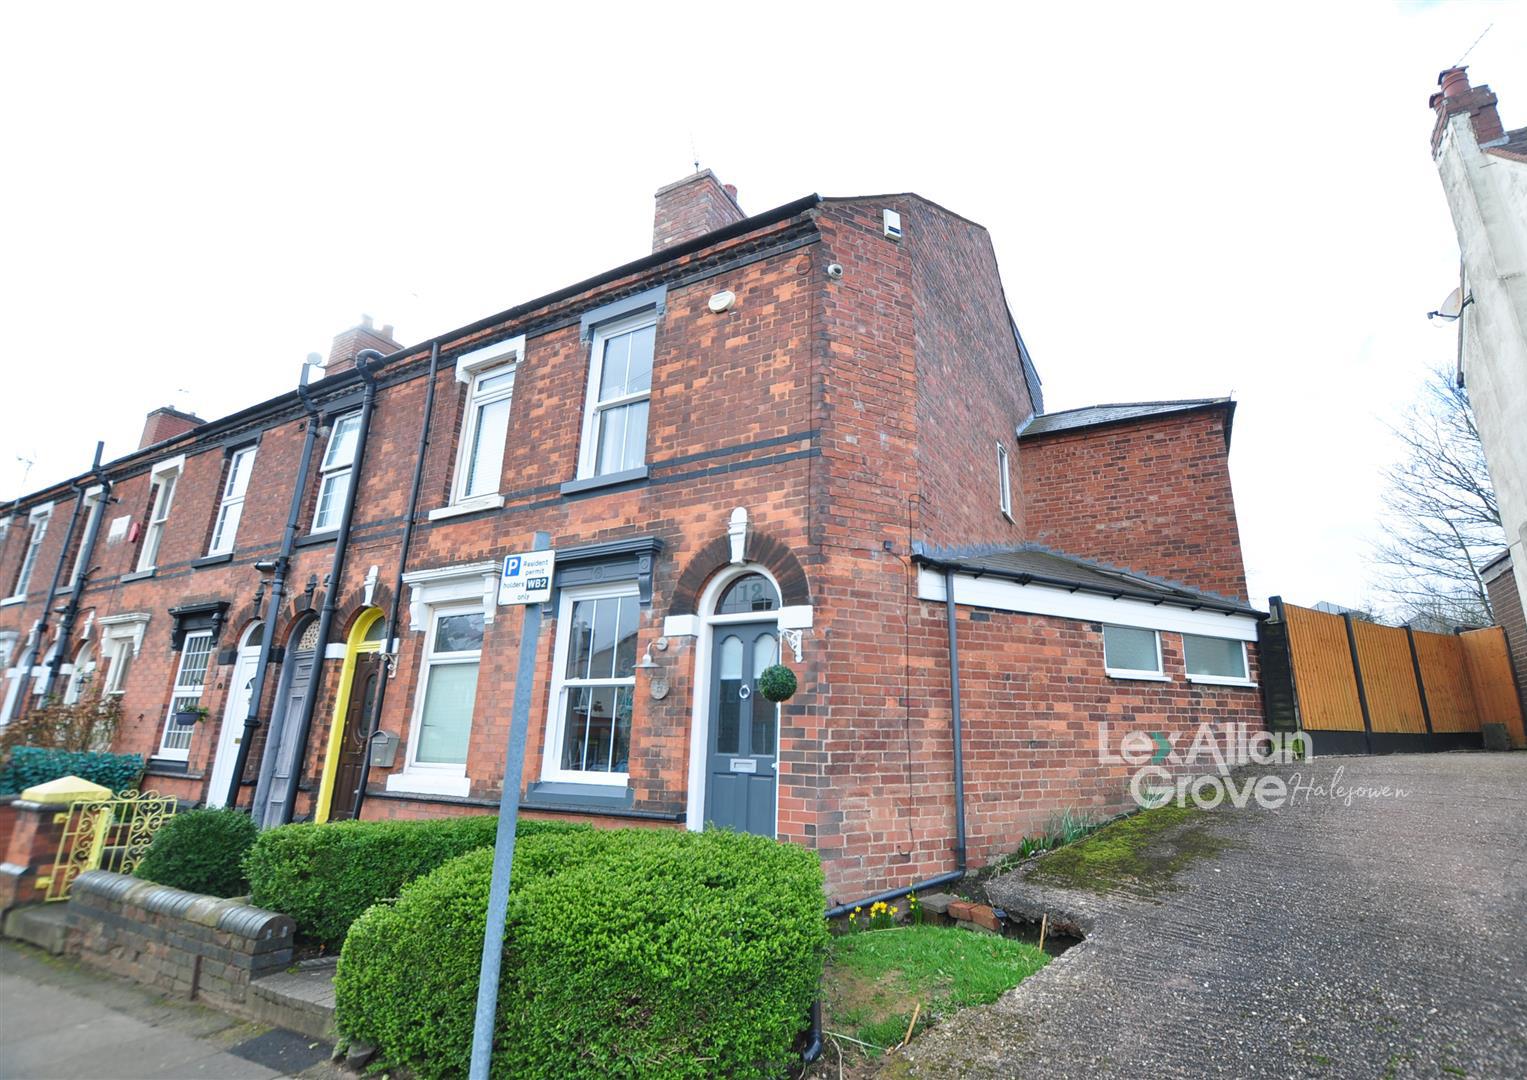 3 bed  for sale in Church Vale, West Bromwich, B71 